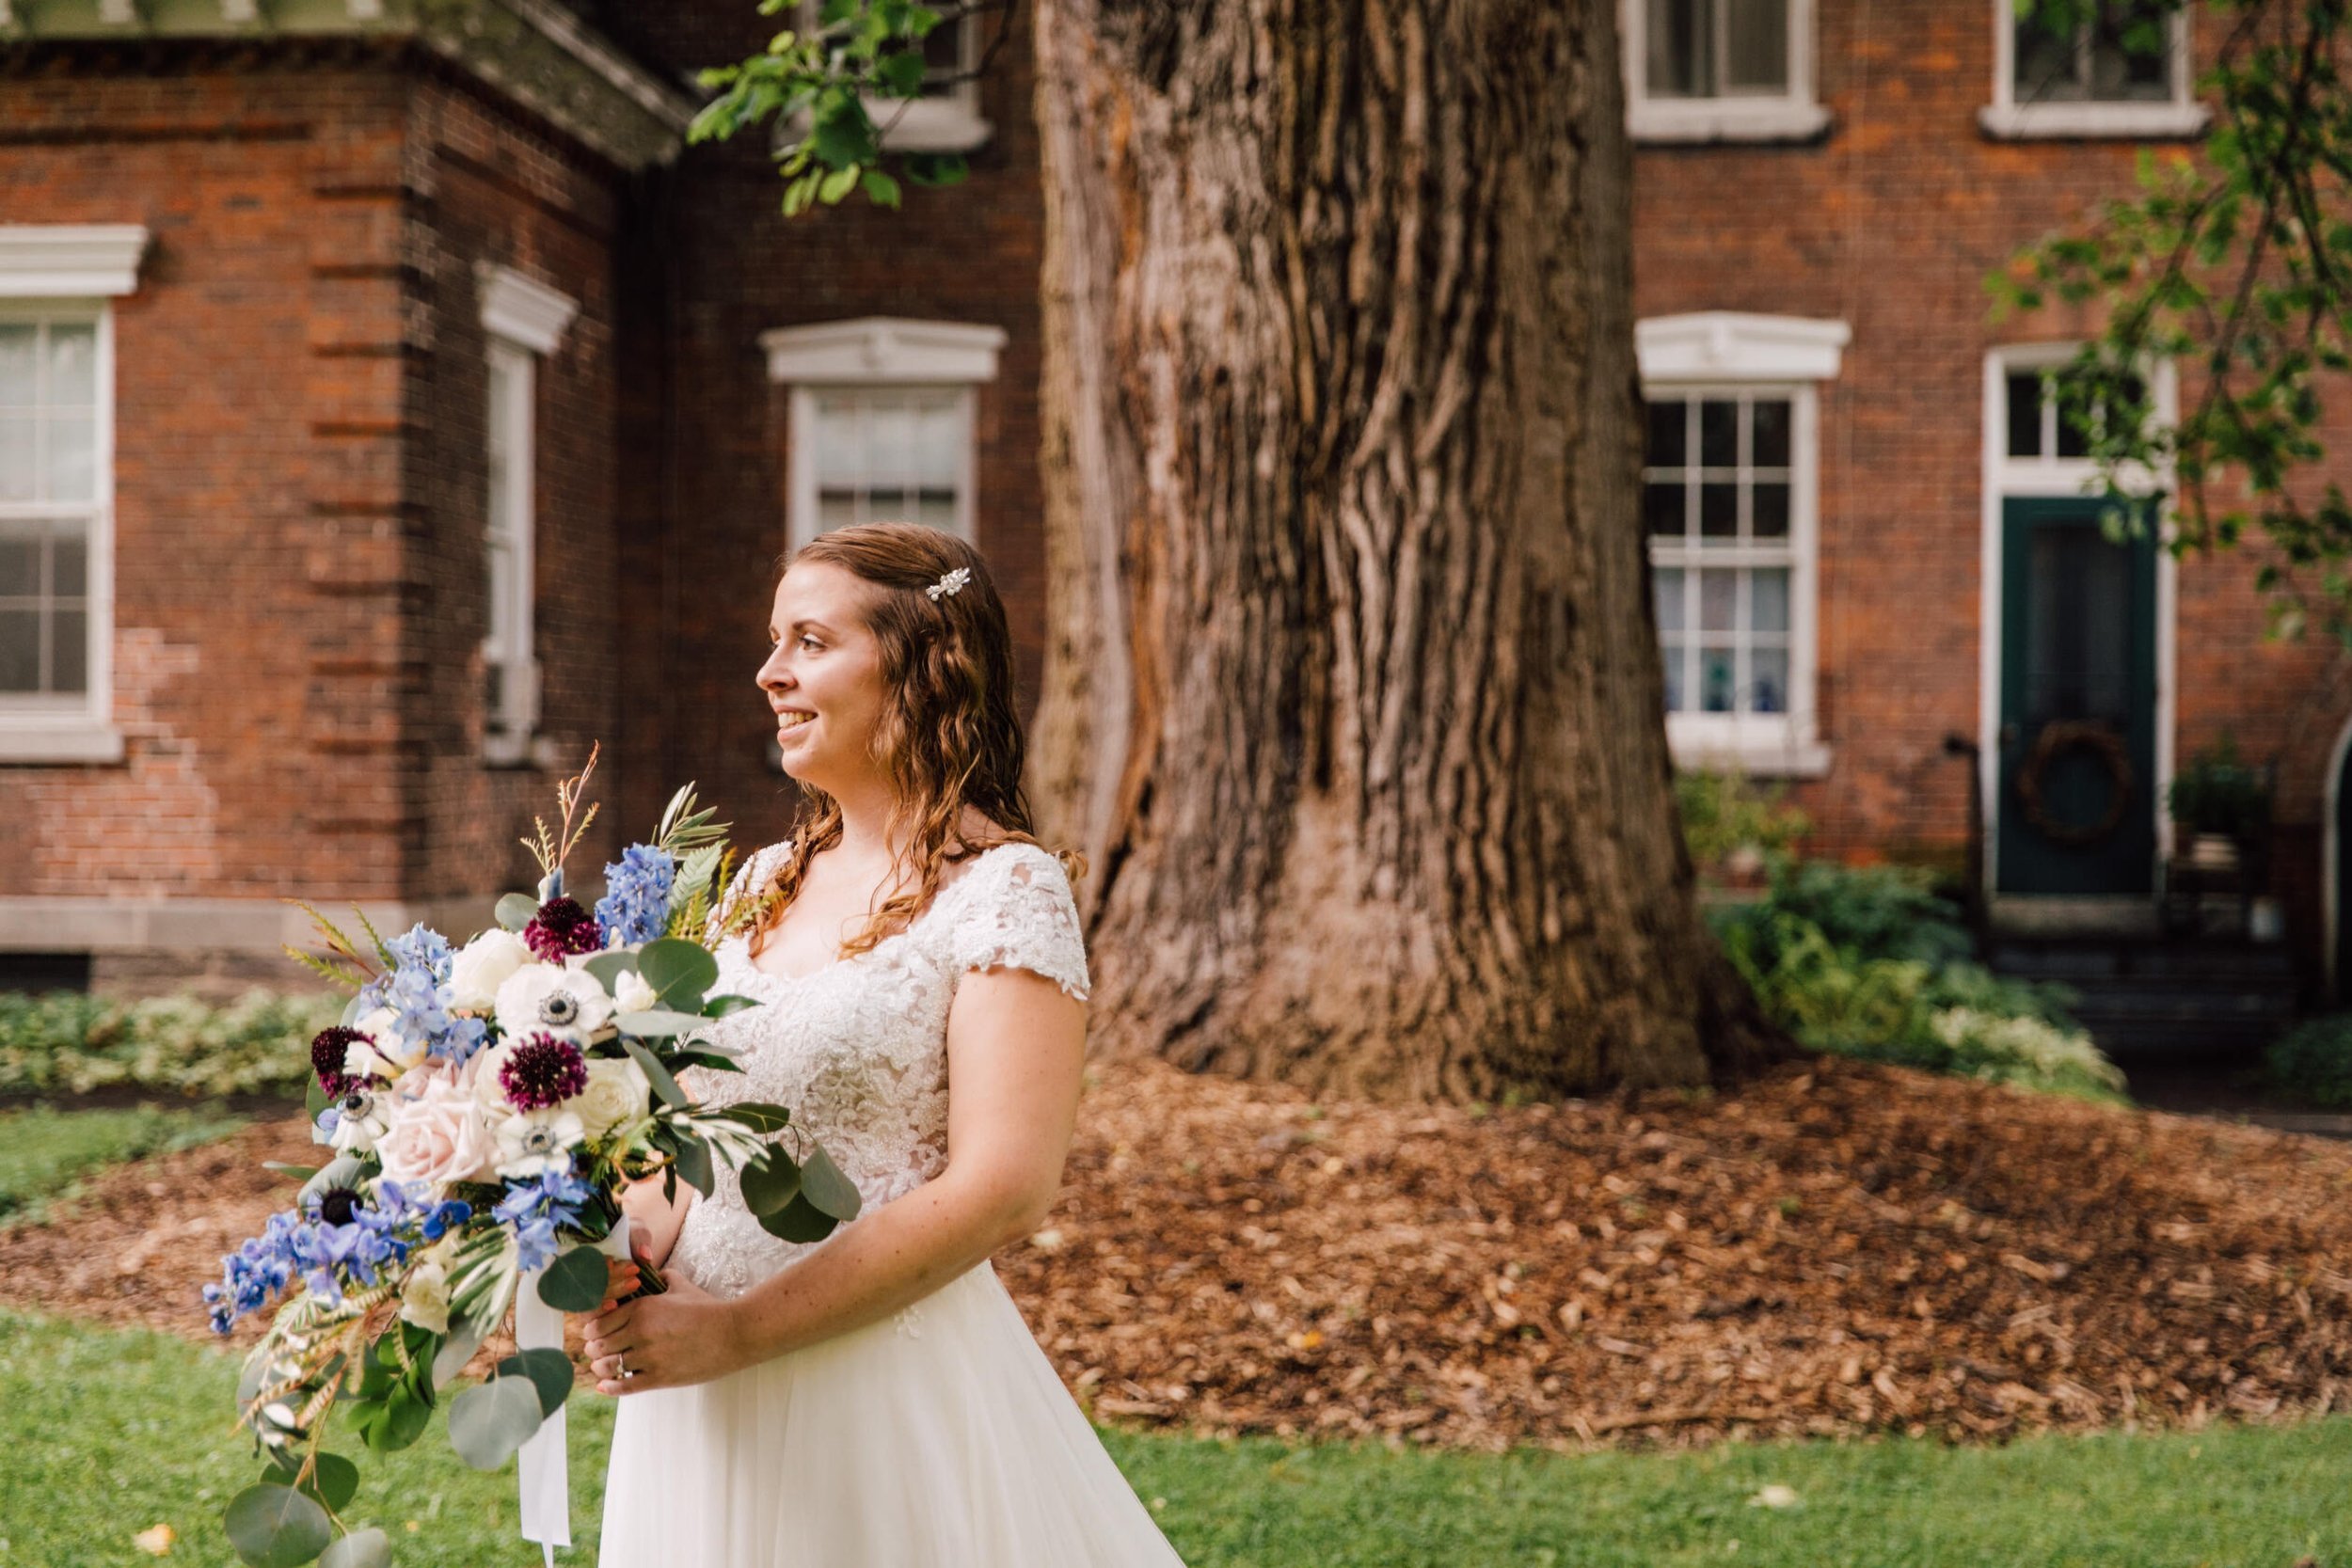  Bride stands with florals in hand moments before the ceremony at oneida community mansion house 